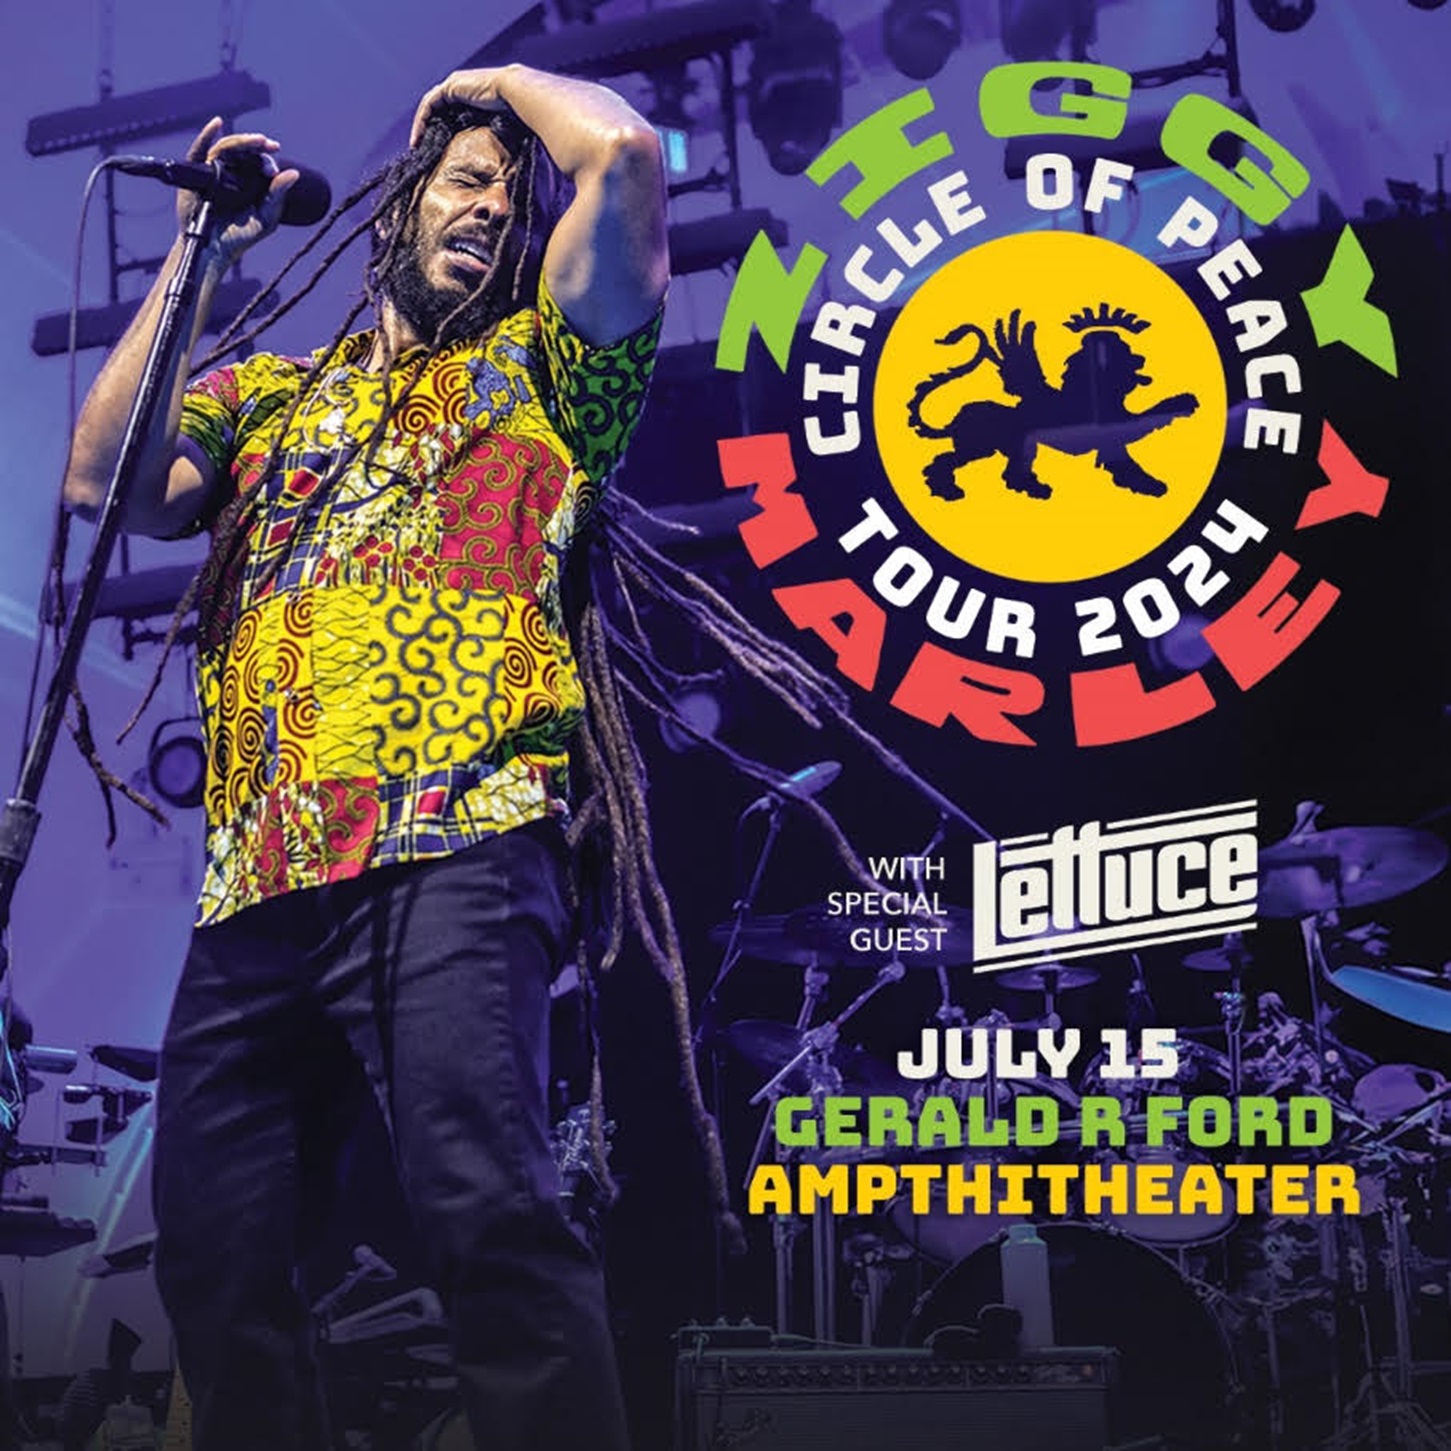 AEG PRESENTS ANNOUNCES ZIGGY MARLEY WITH SPECIAL GUEST LETTUCE TO PERFORM LIVE AT GERALD R. FORD AMPHITHEATER ON JULY 15, 2024